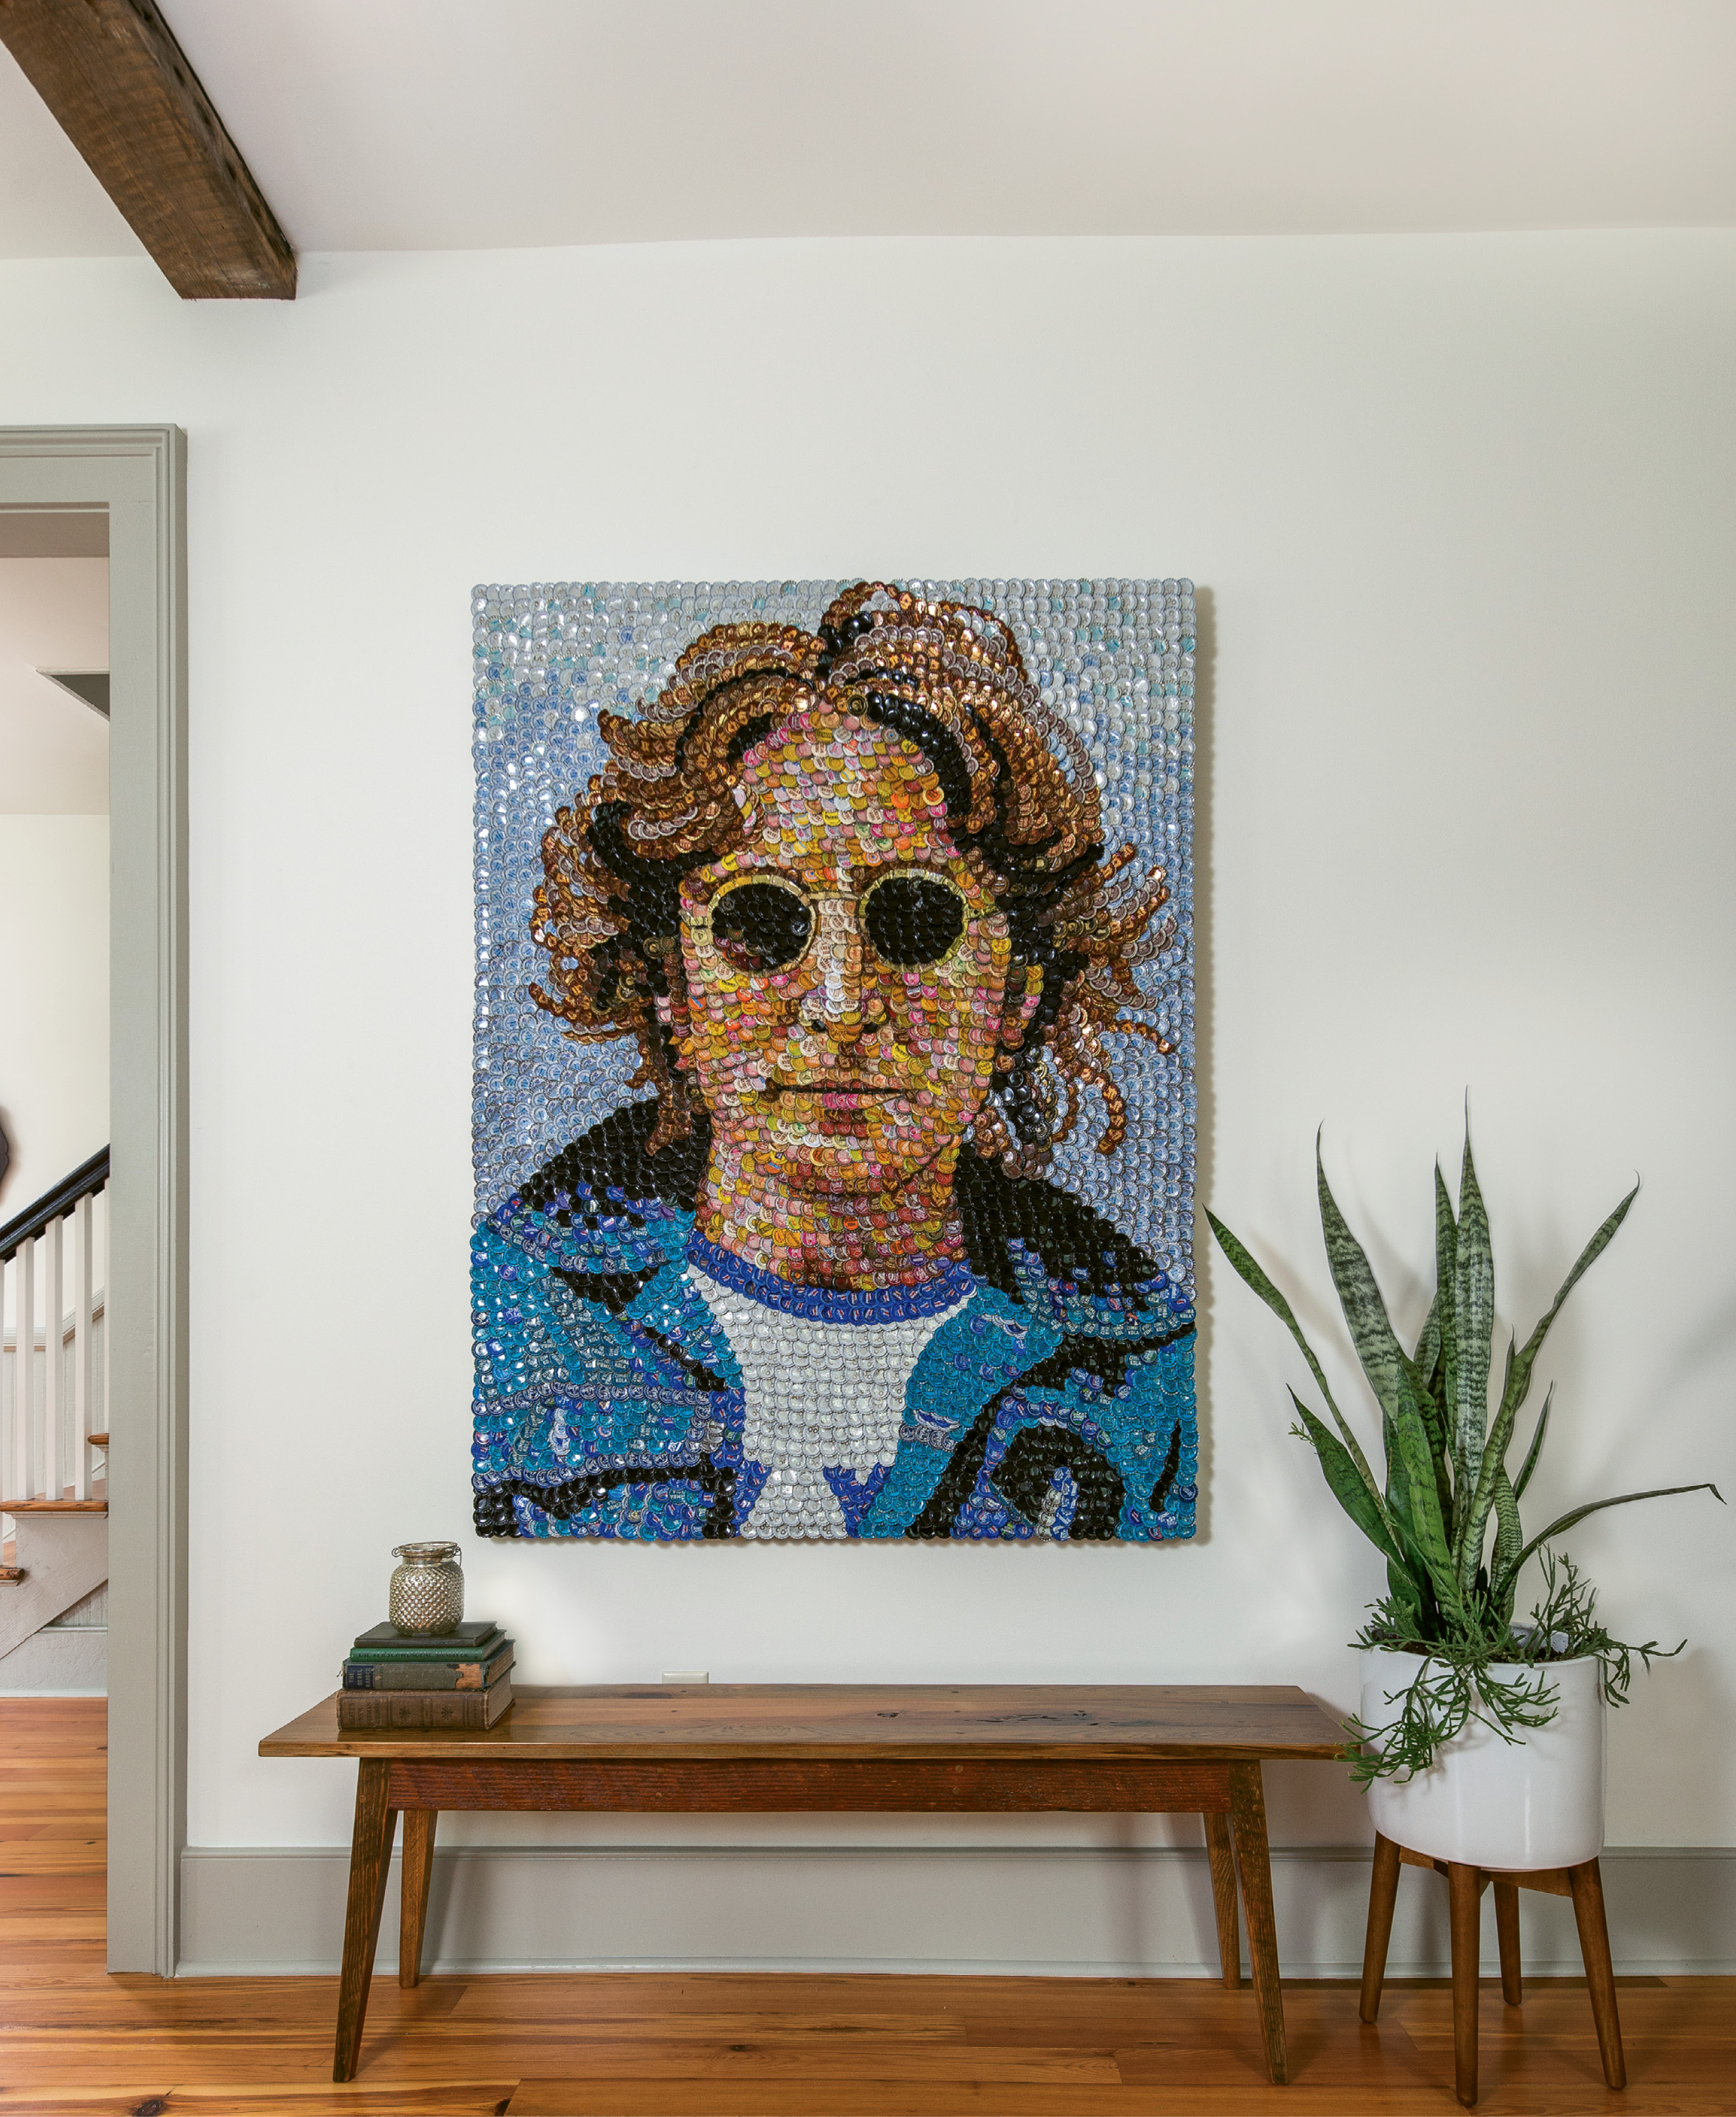 The couple kept the decor minimal in order to highlight the architectural features, but the accessories they do have pack plenty of personality. After admiring the work of local artist Molly B. Right for many years, the Ellsworths commissioned this bottle-cap portrait of John Lennon, which hangs above a custom Landrum table in the living area.